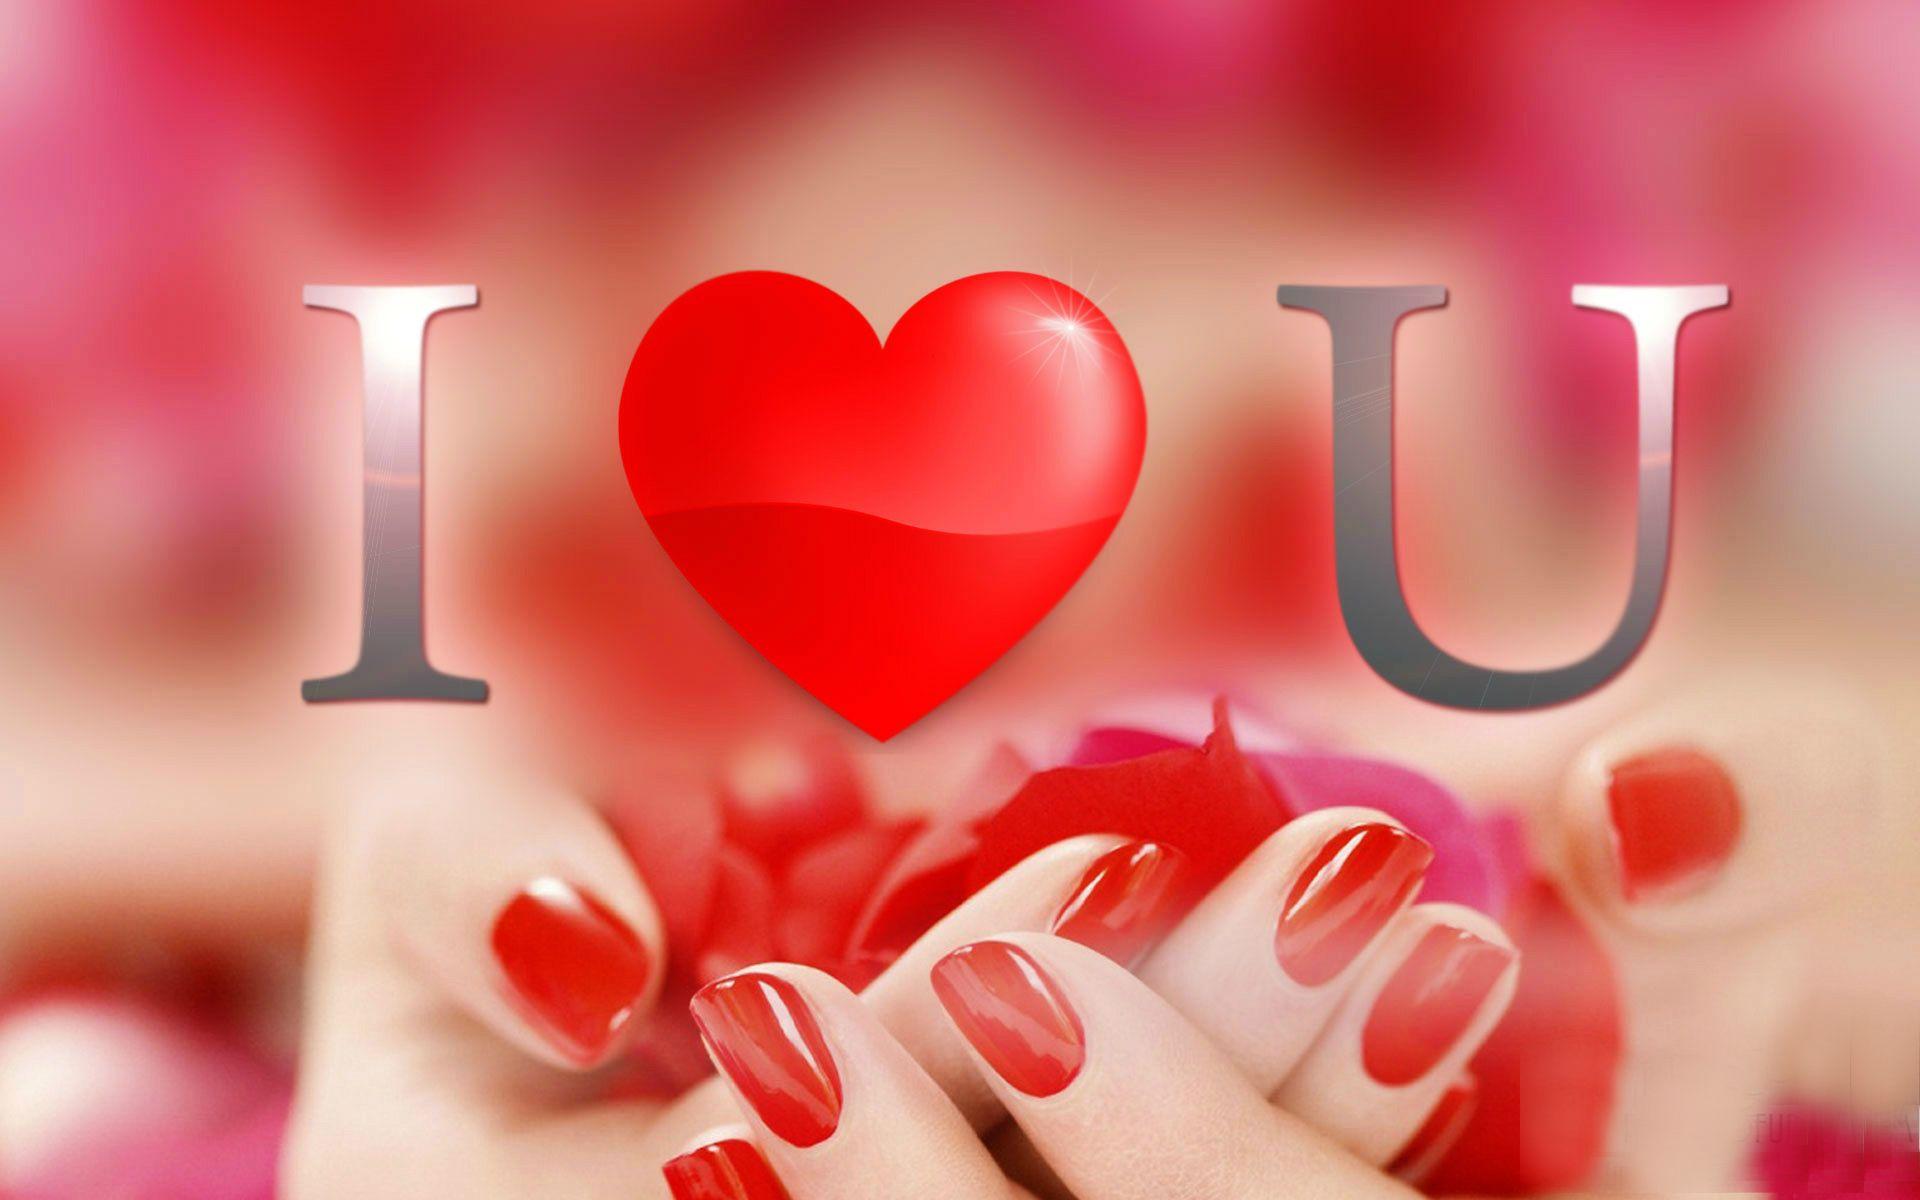 Wallpapers With Hearts Wallpapers 1920×1200 Heart Love Image